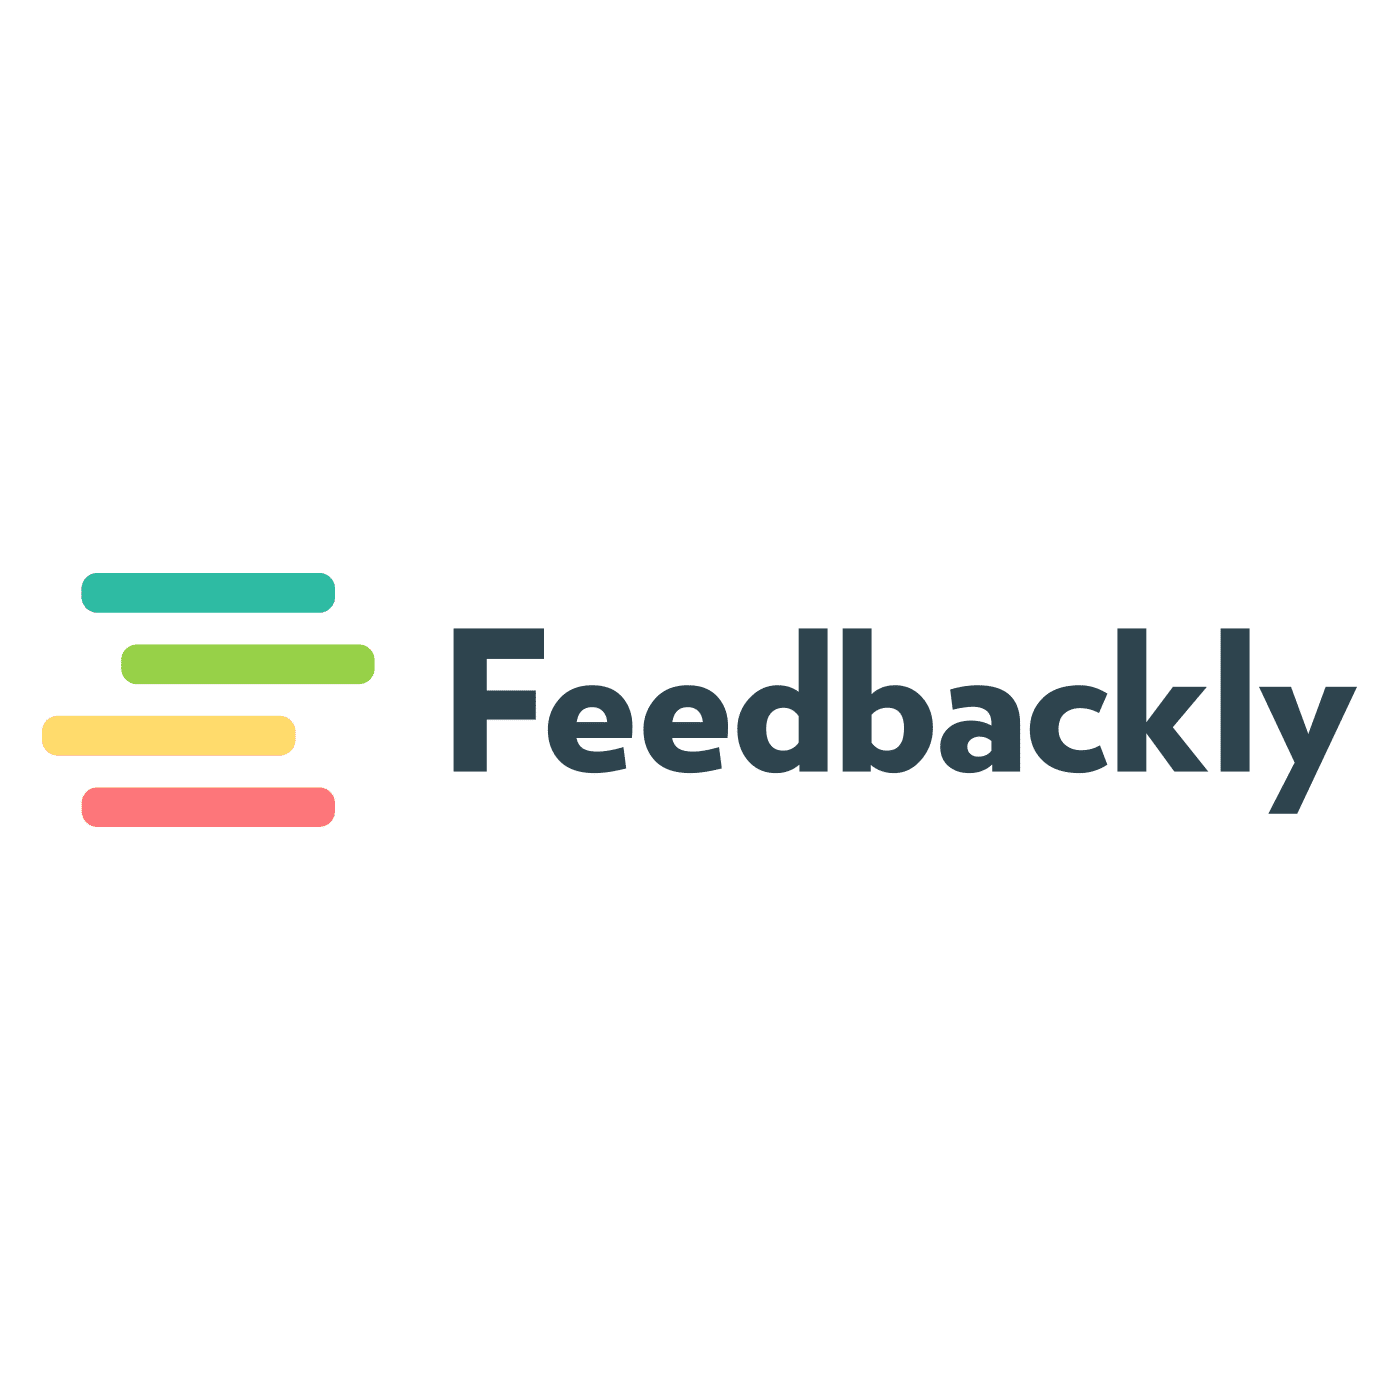 Feedbackly - Reveal how customer emotions impact your business